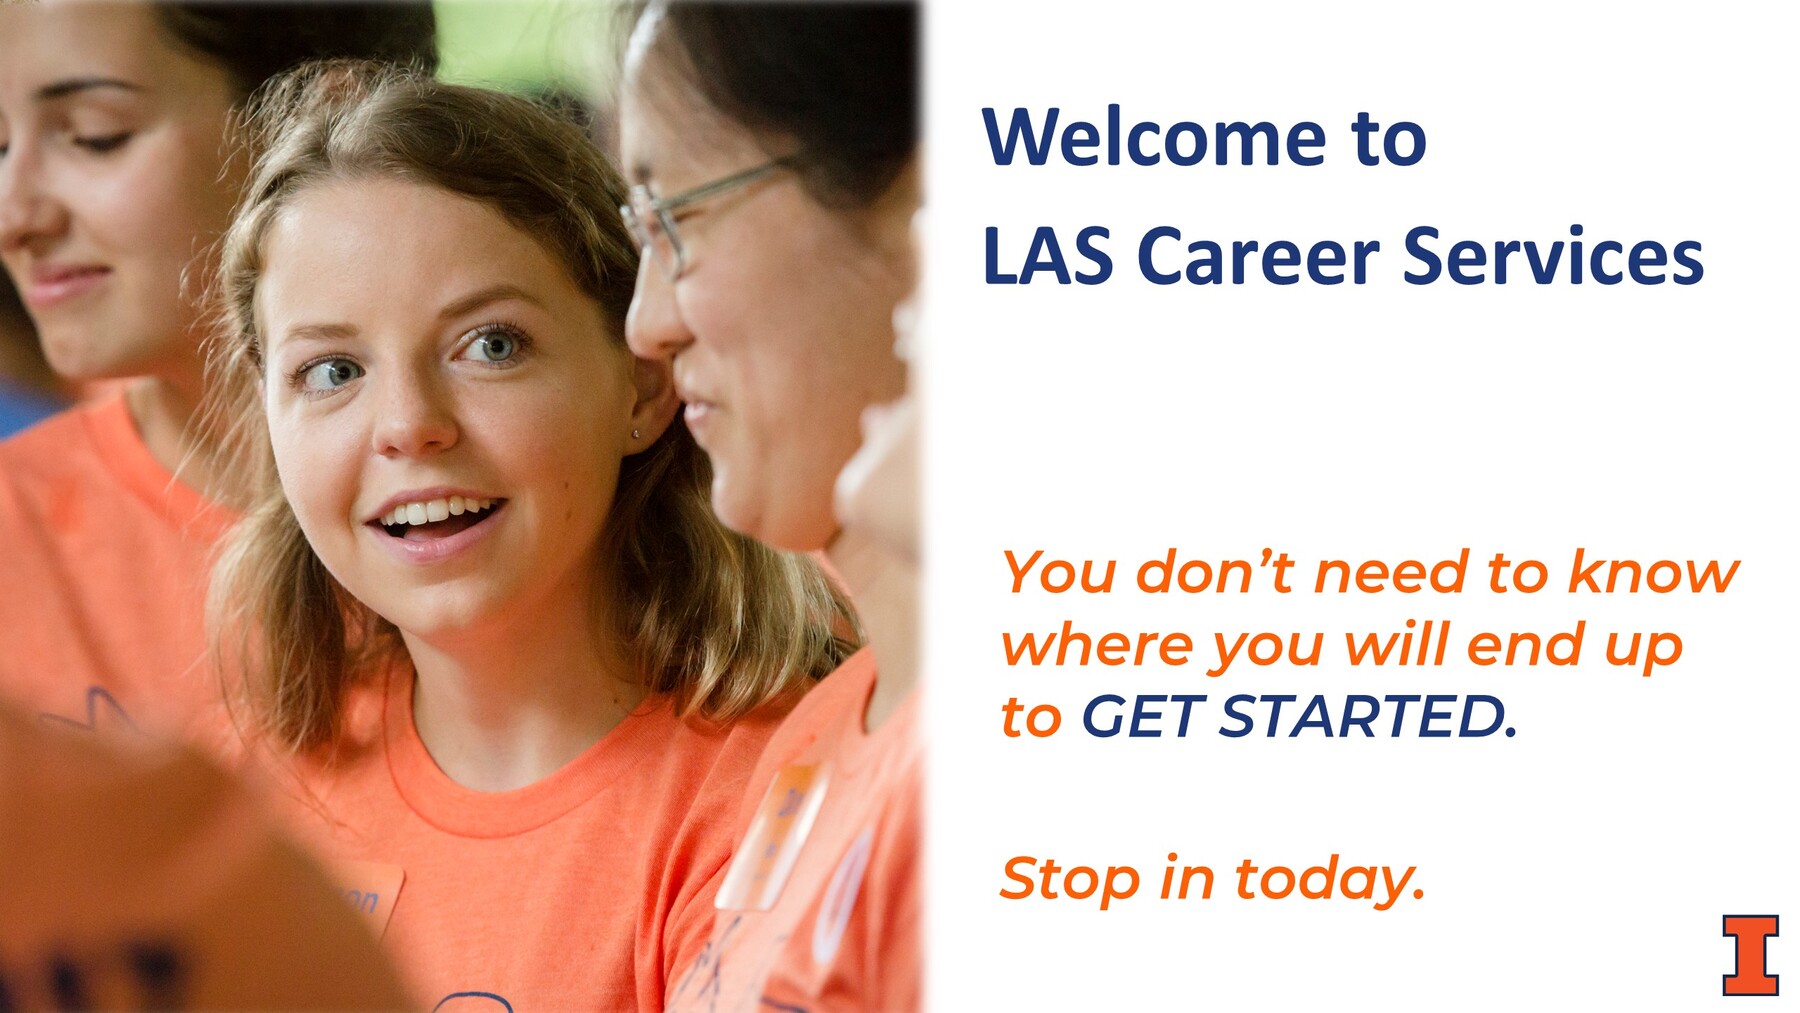 This image includes smiling students with a warm welcome to LAS Career Services